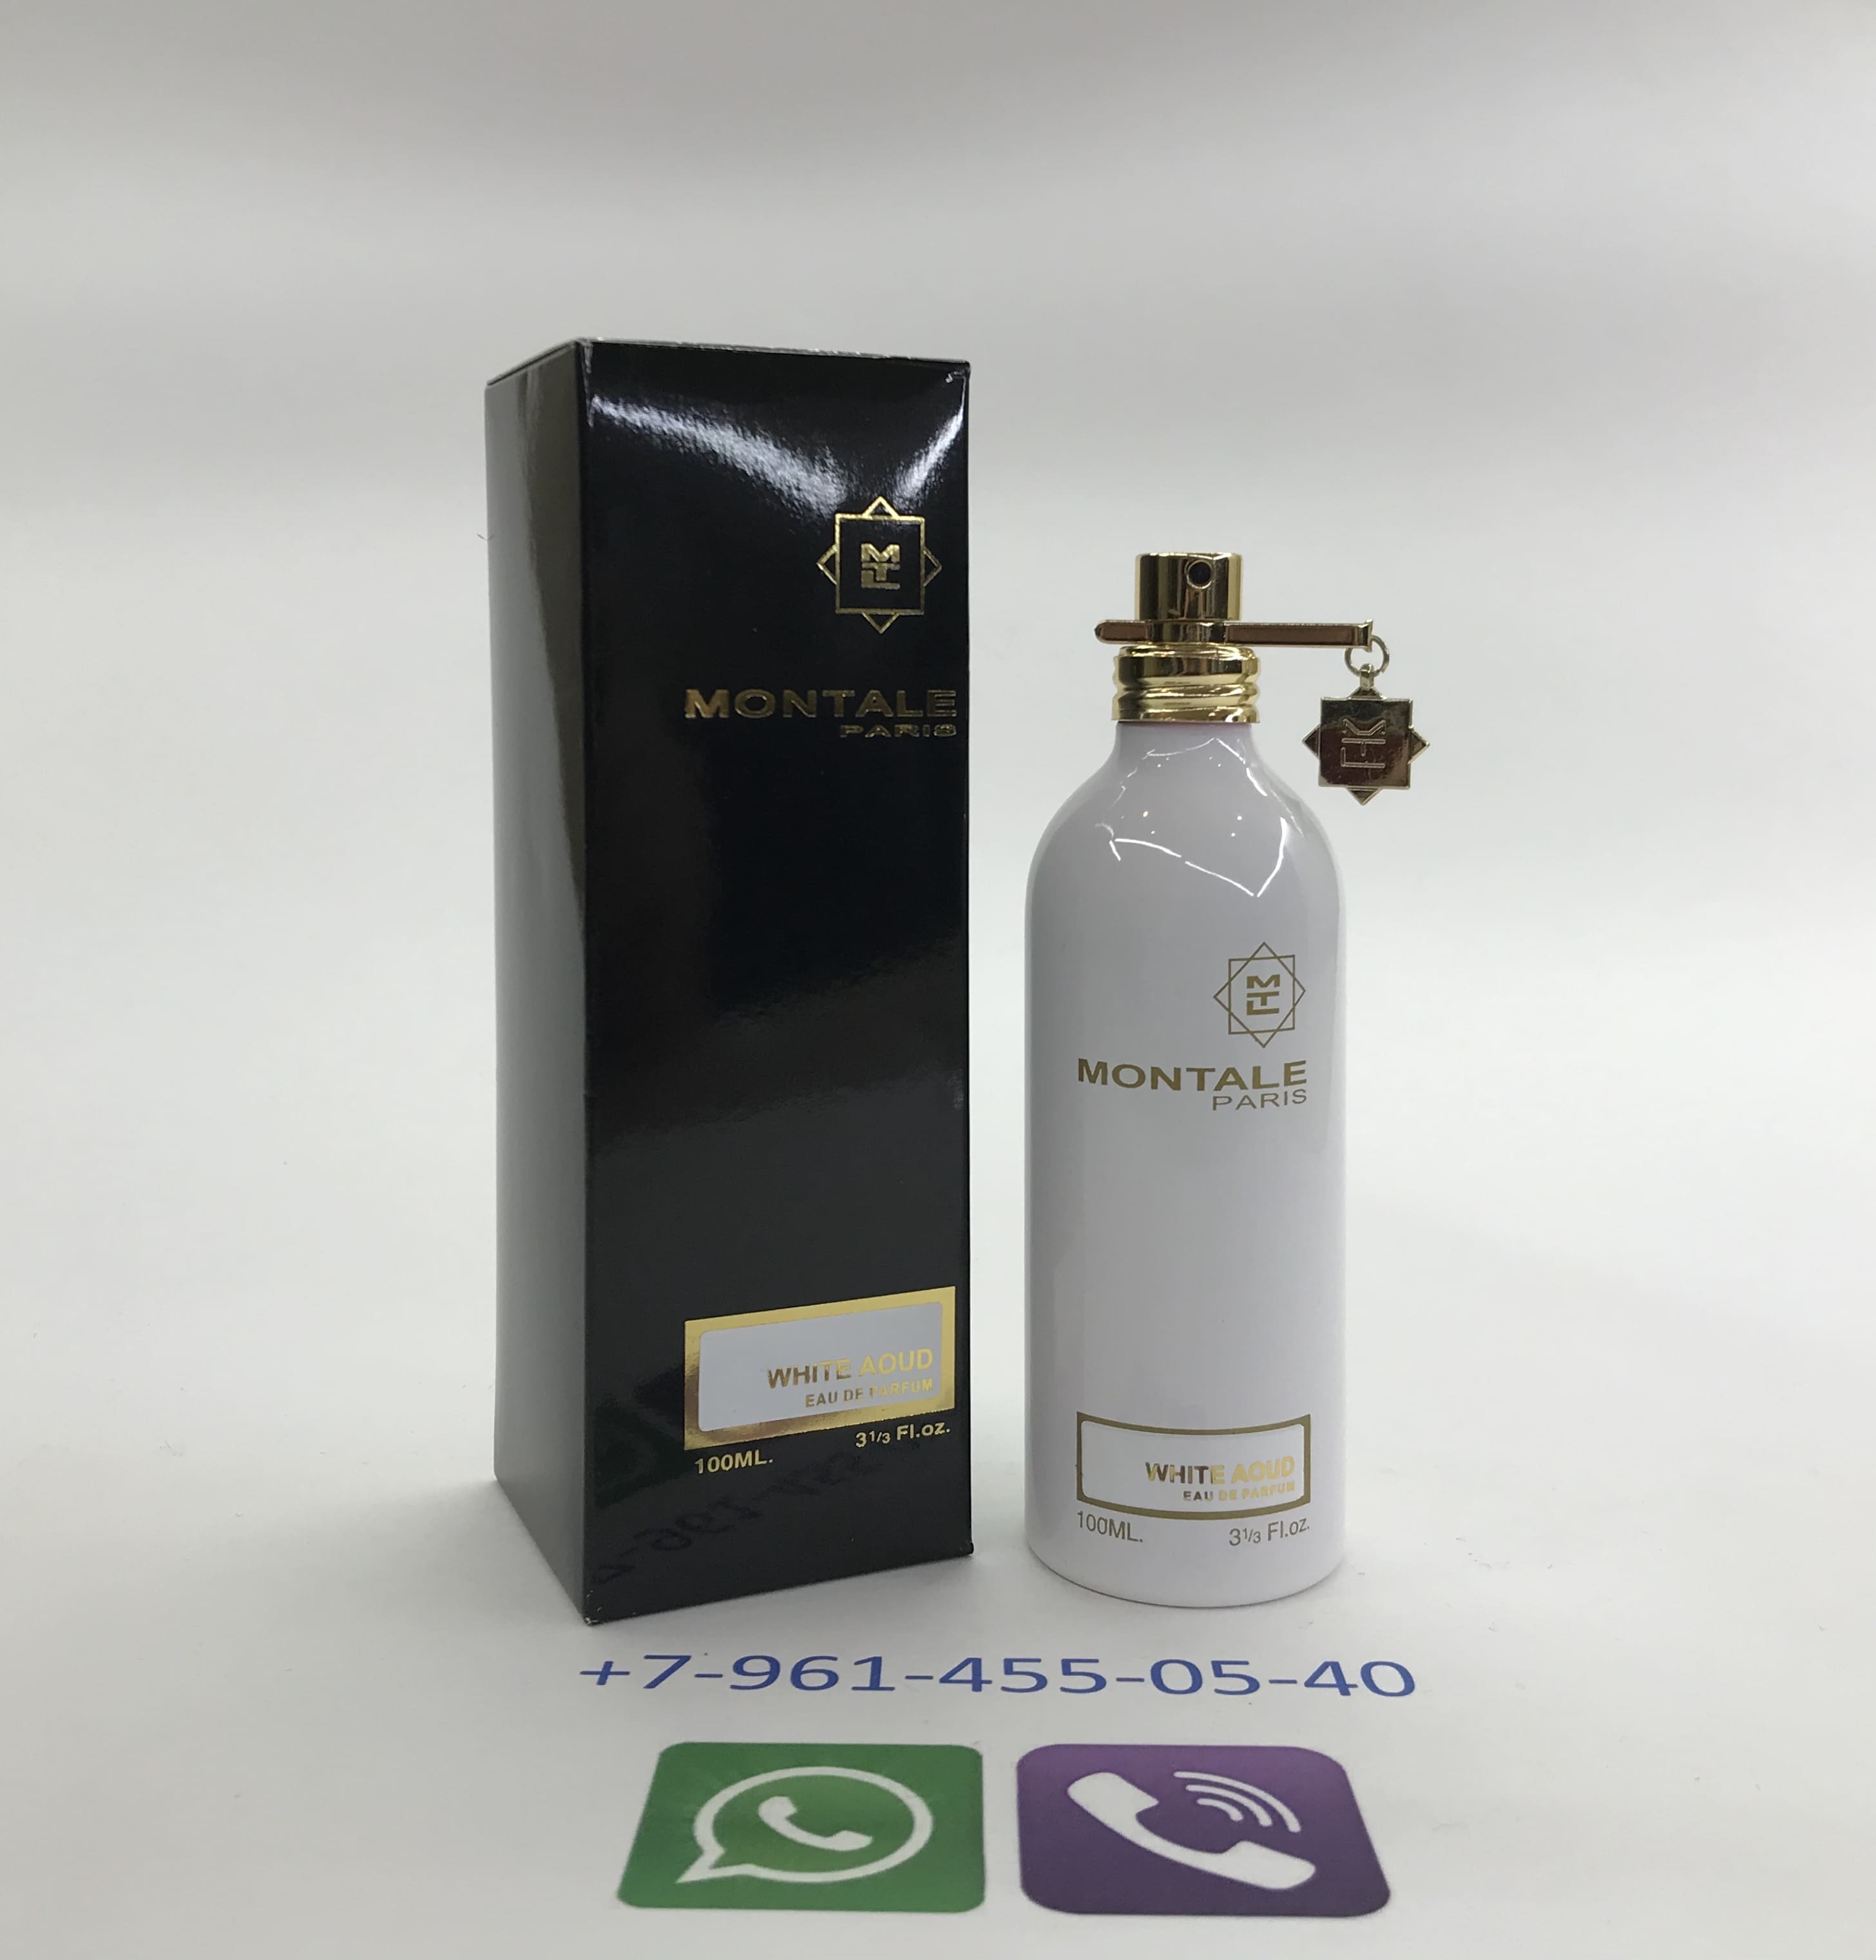 Montale white. Montale белый White Aoud. Монталь White Aoud. Монталь Непал уд. Духи Монталь Непал.